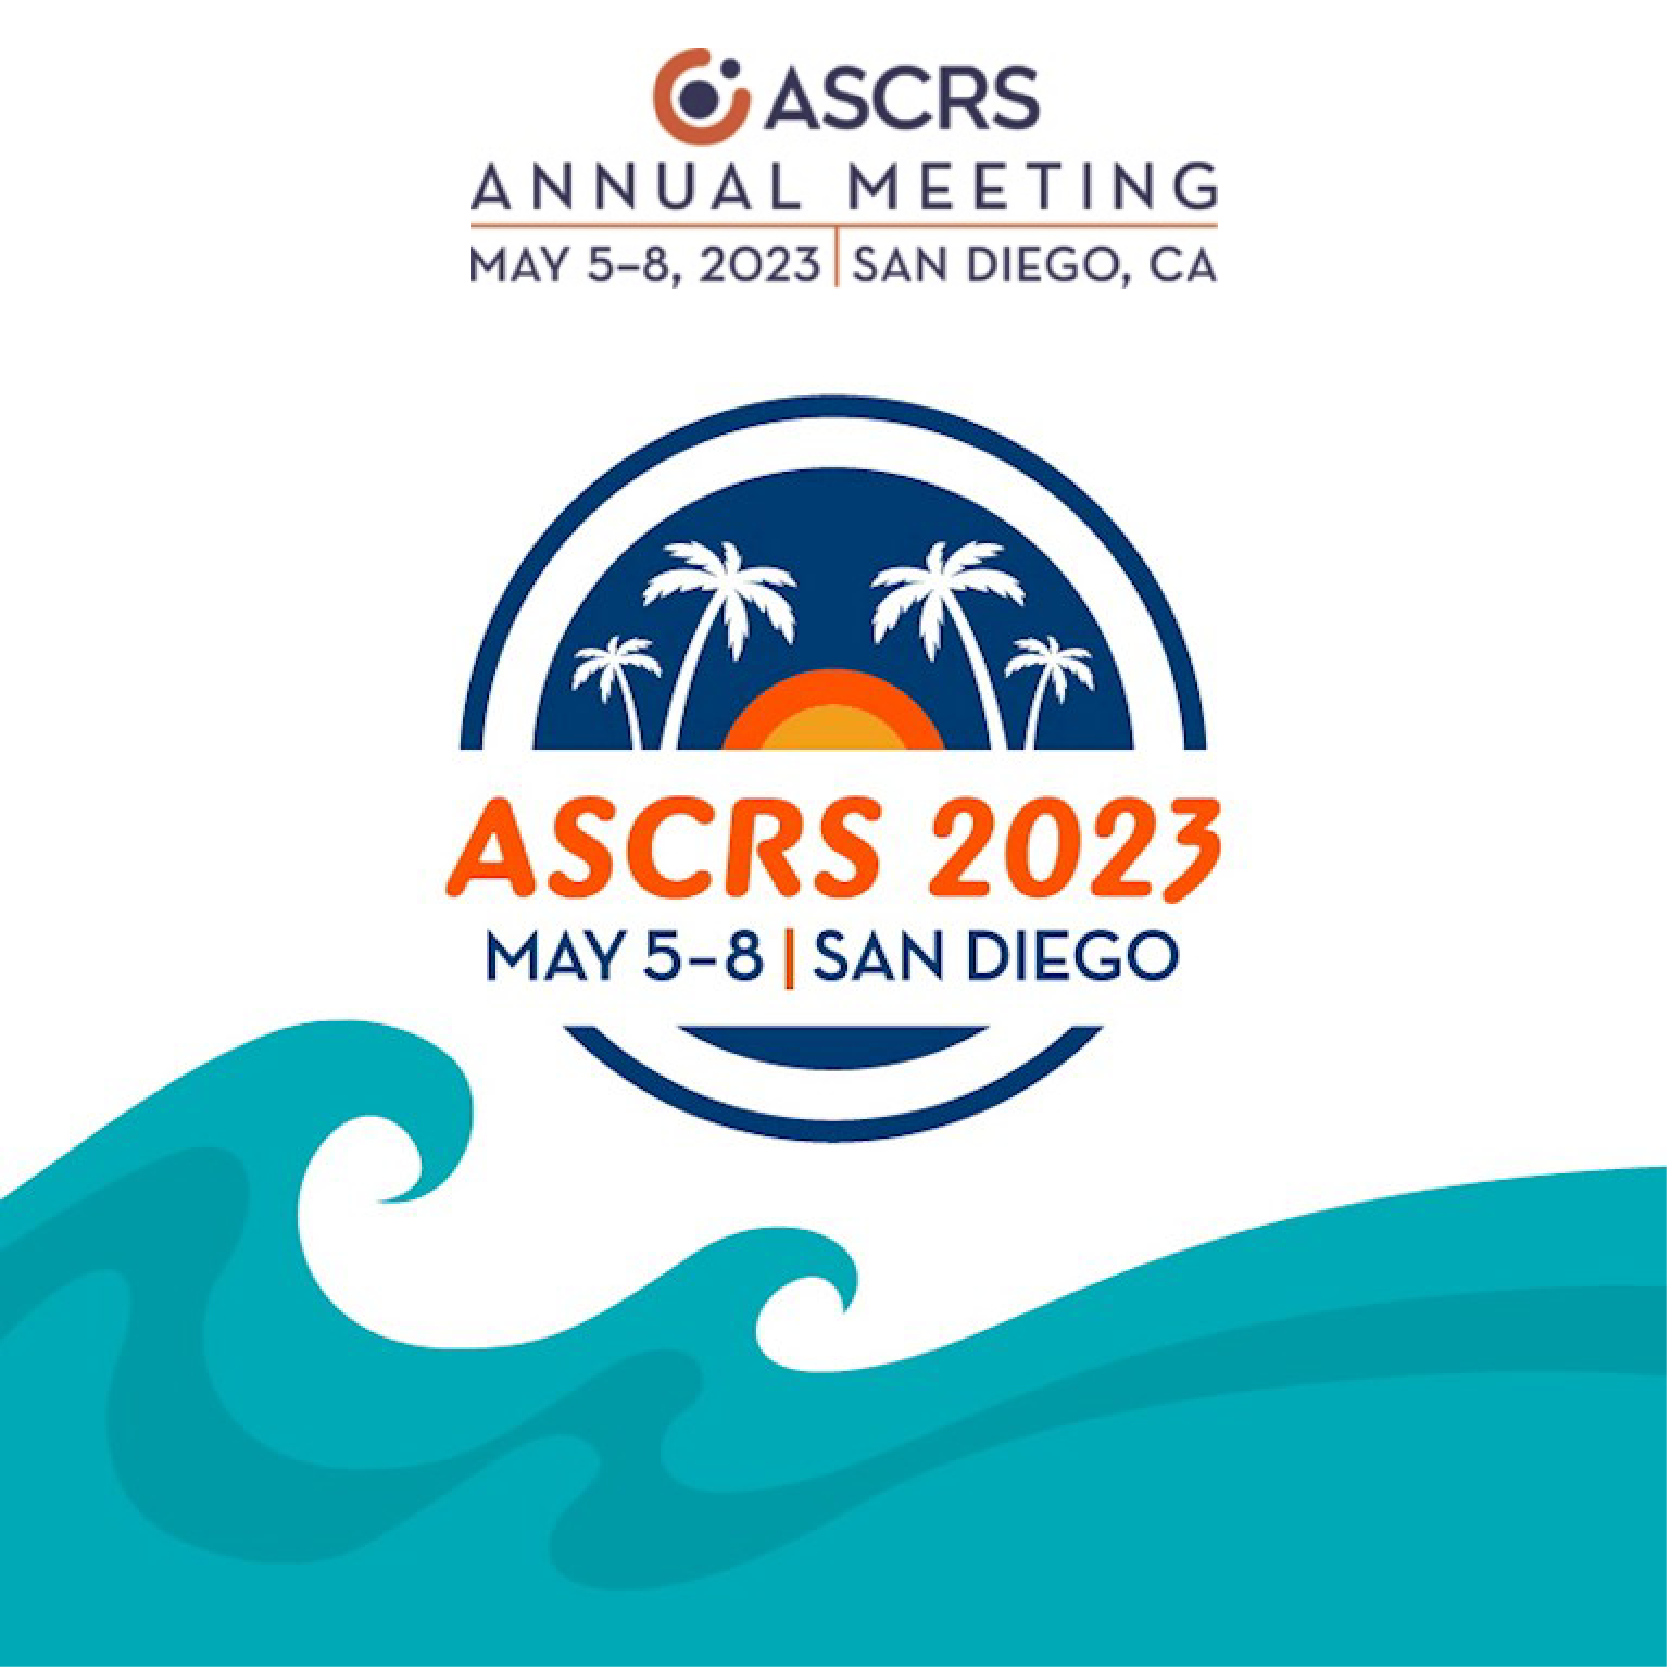 American Society of Cataract and Refractive Surgery Annual Meeting - ASCRS 2023